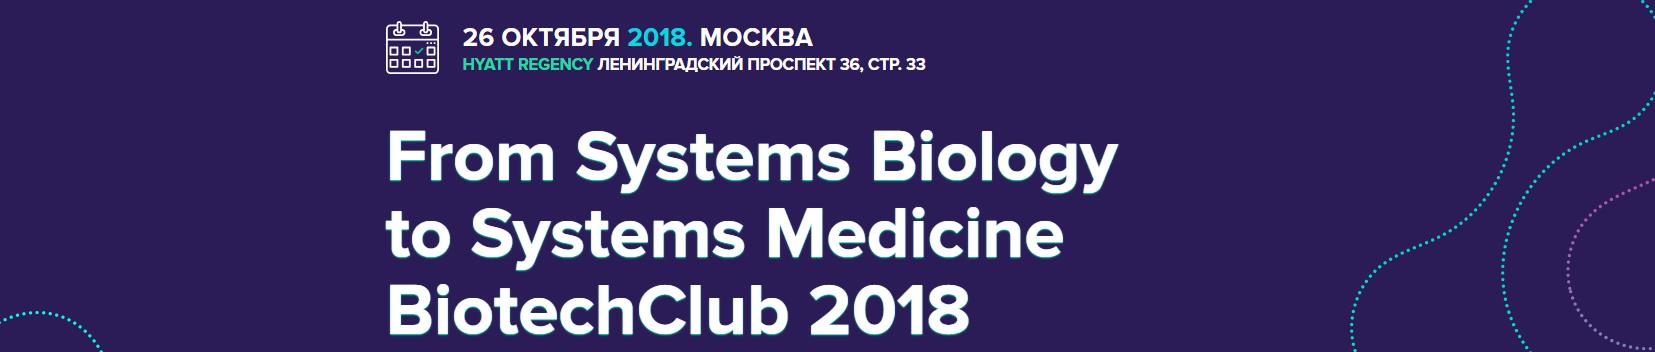 From Systems Biology to Systems Medicine BiotechClub 2018